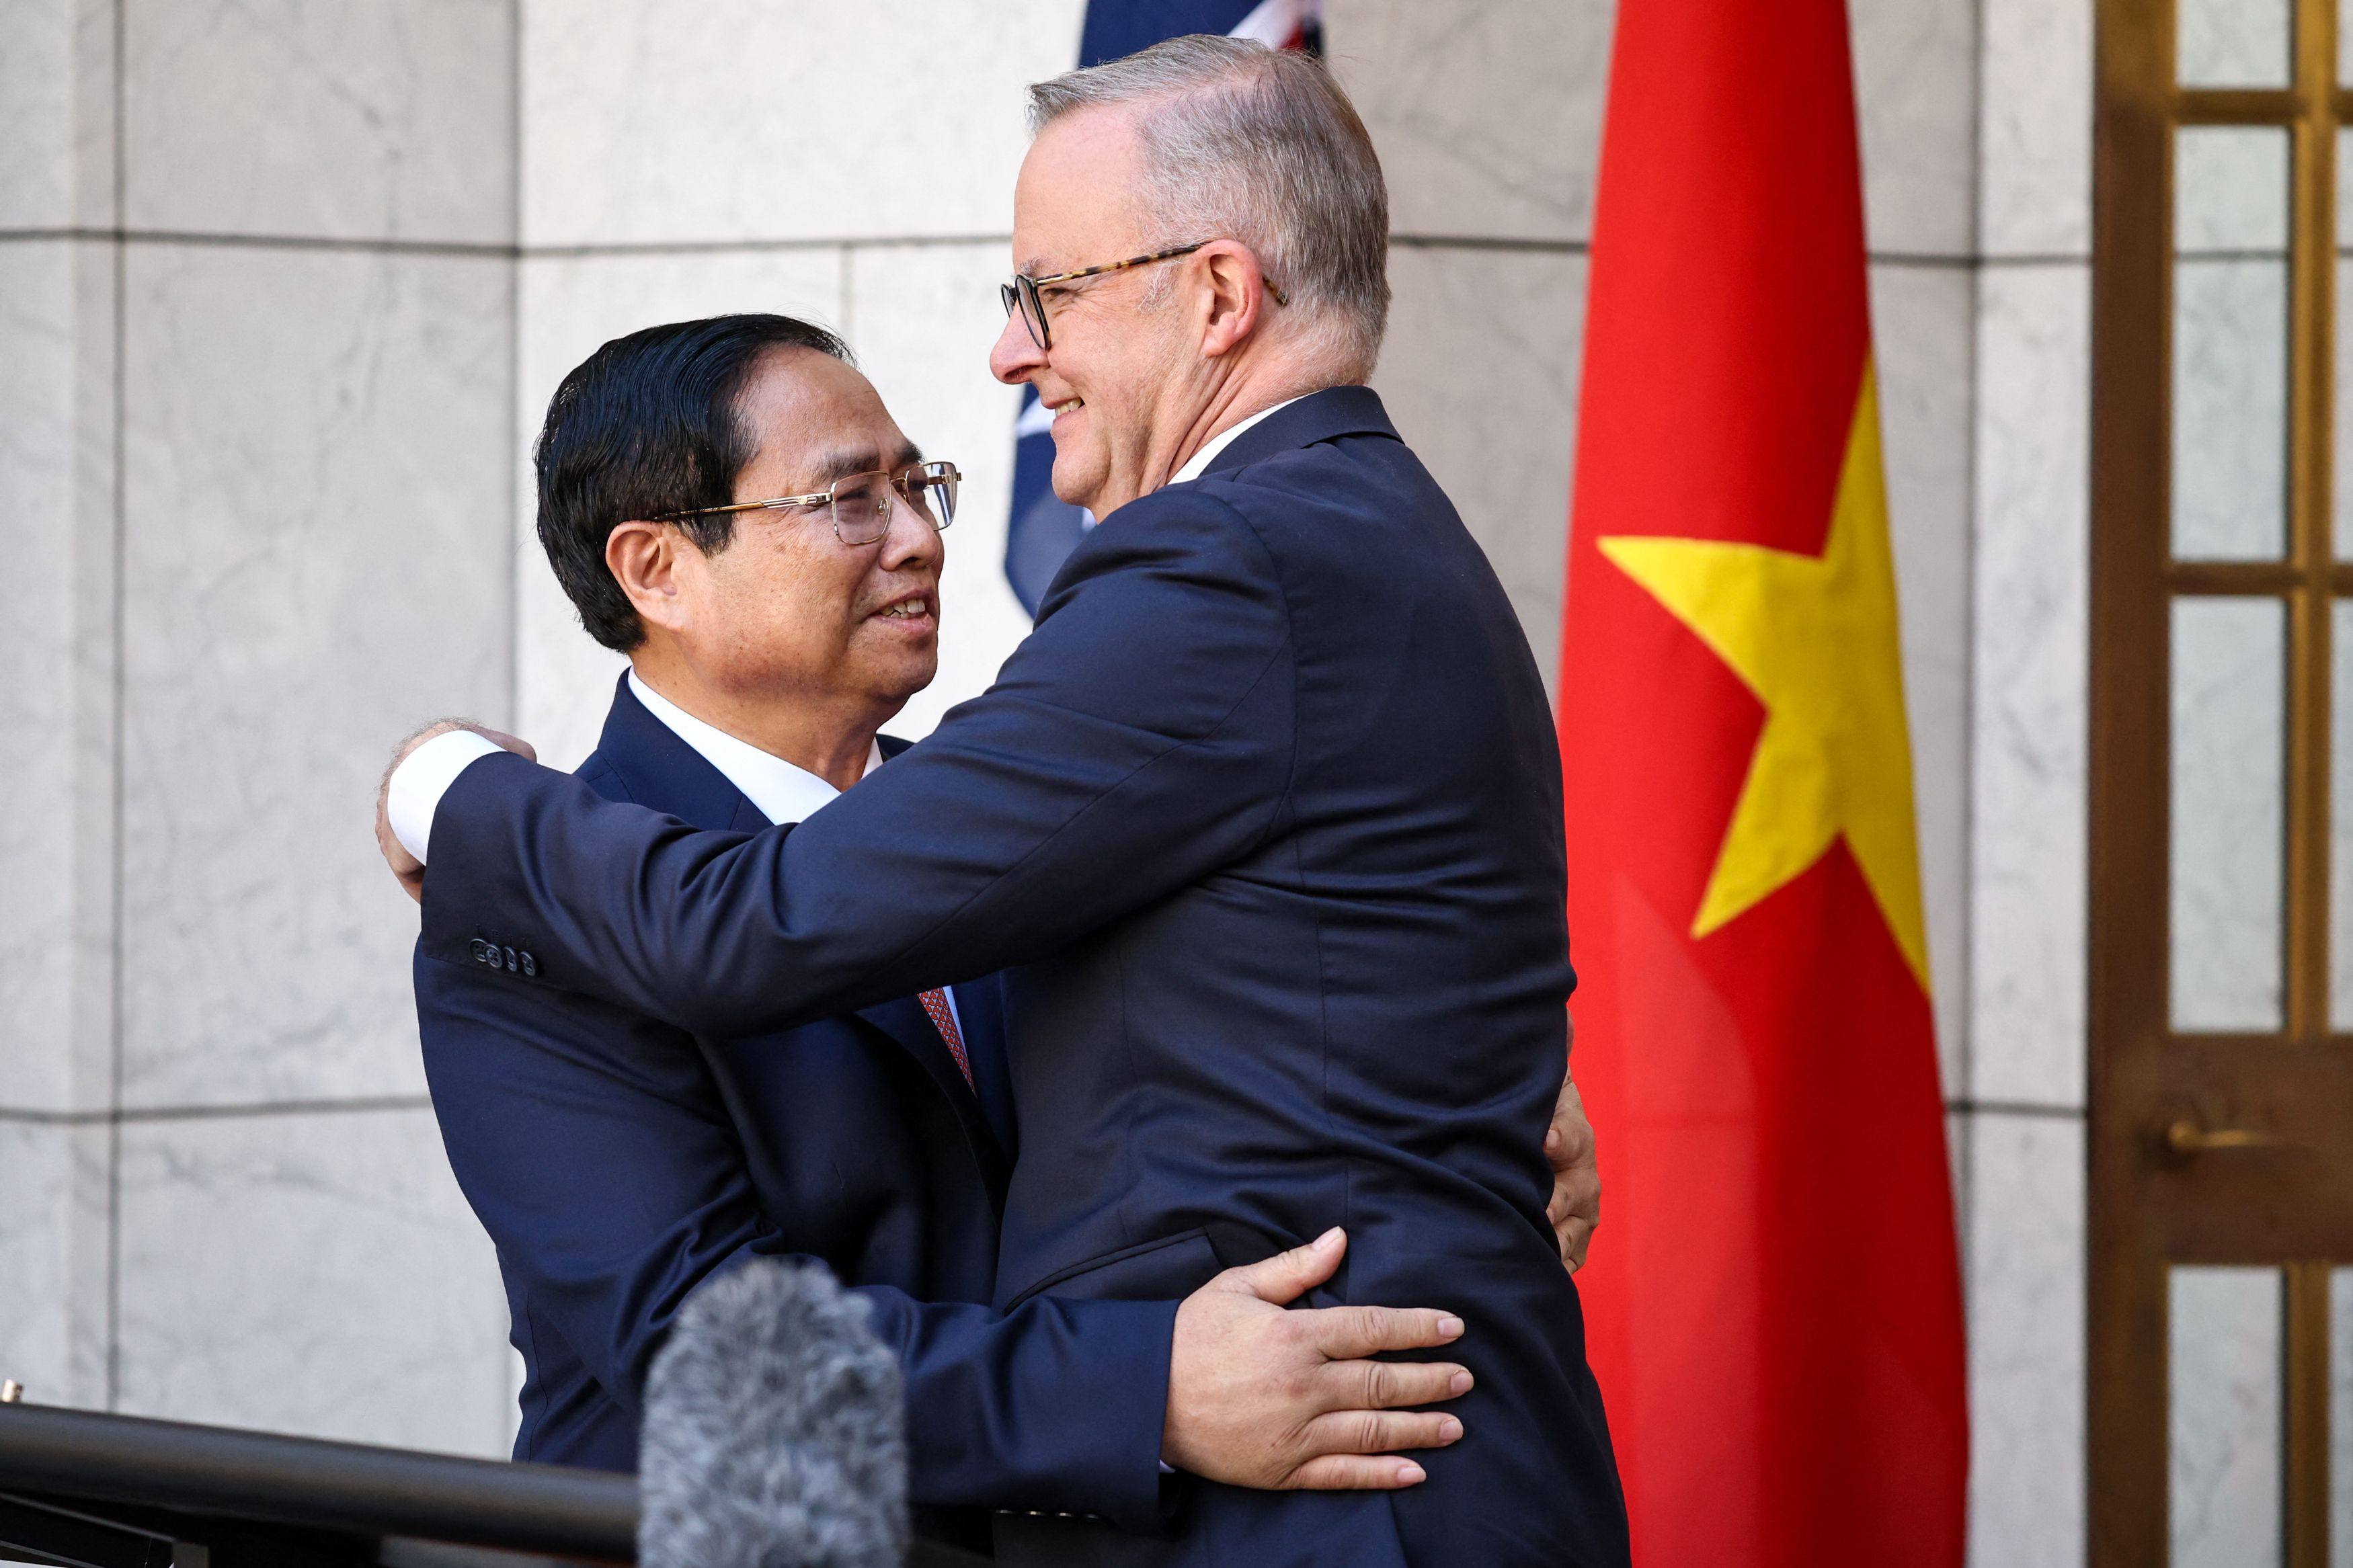 Vietnam Prime Minister Pham Minh Chinh (left) embraces his Australian counterpart Anthony Albanese after delivering a joint statement at Parliament House in Canberra on March 7. Photo: AFP